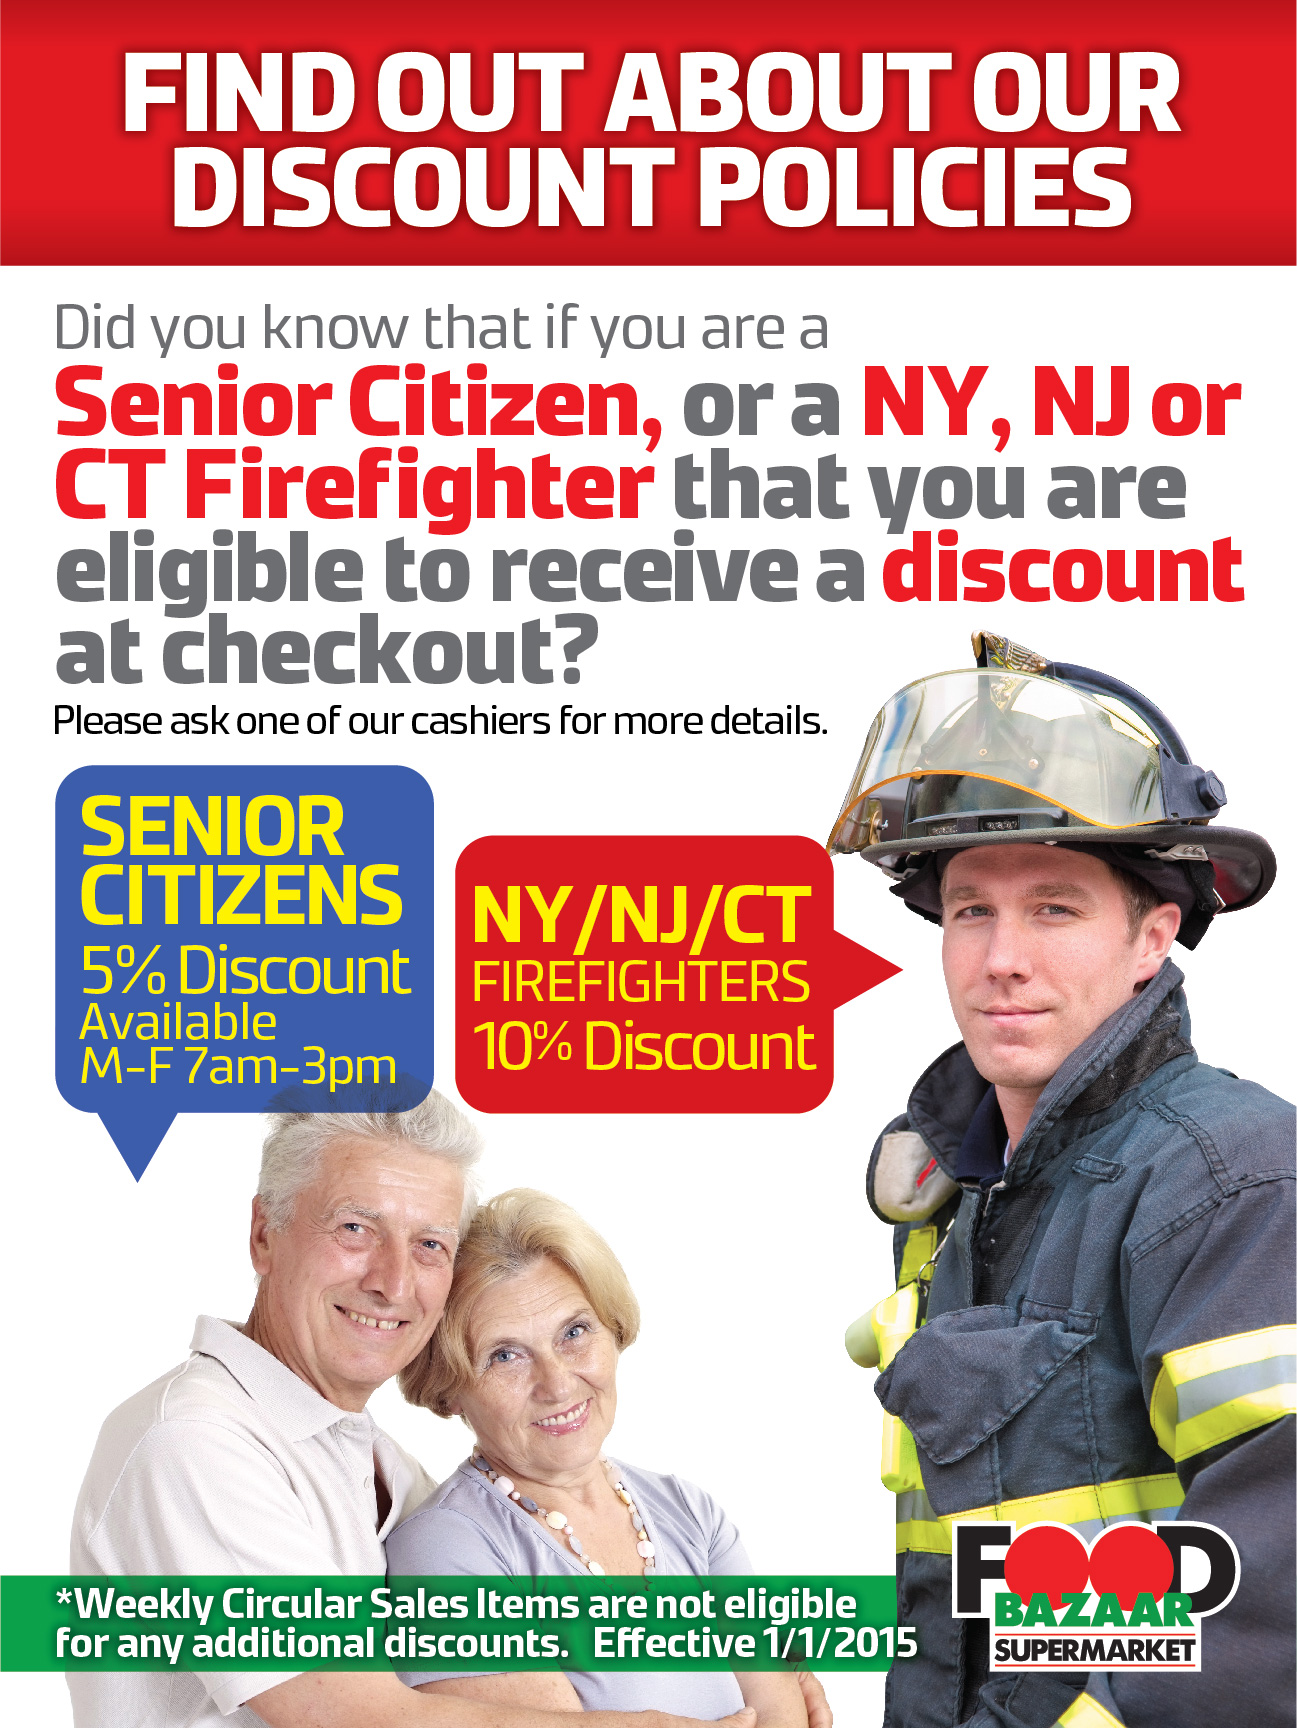 Discounts Available for Senior Citizens and Firefighters Food Bazaar